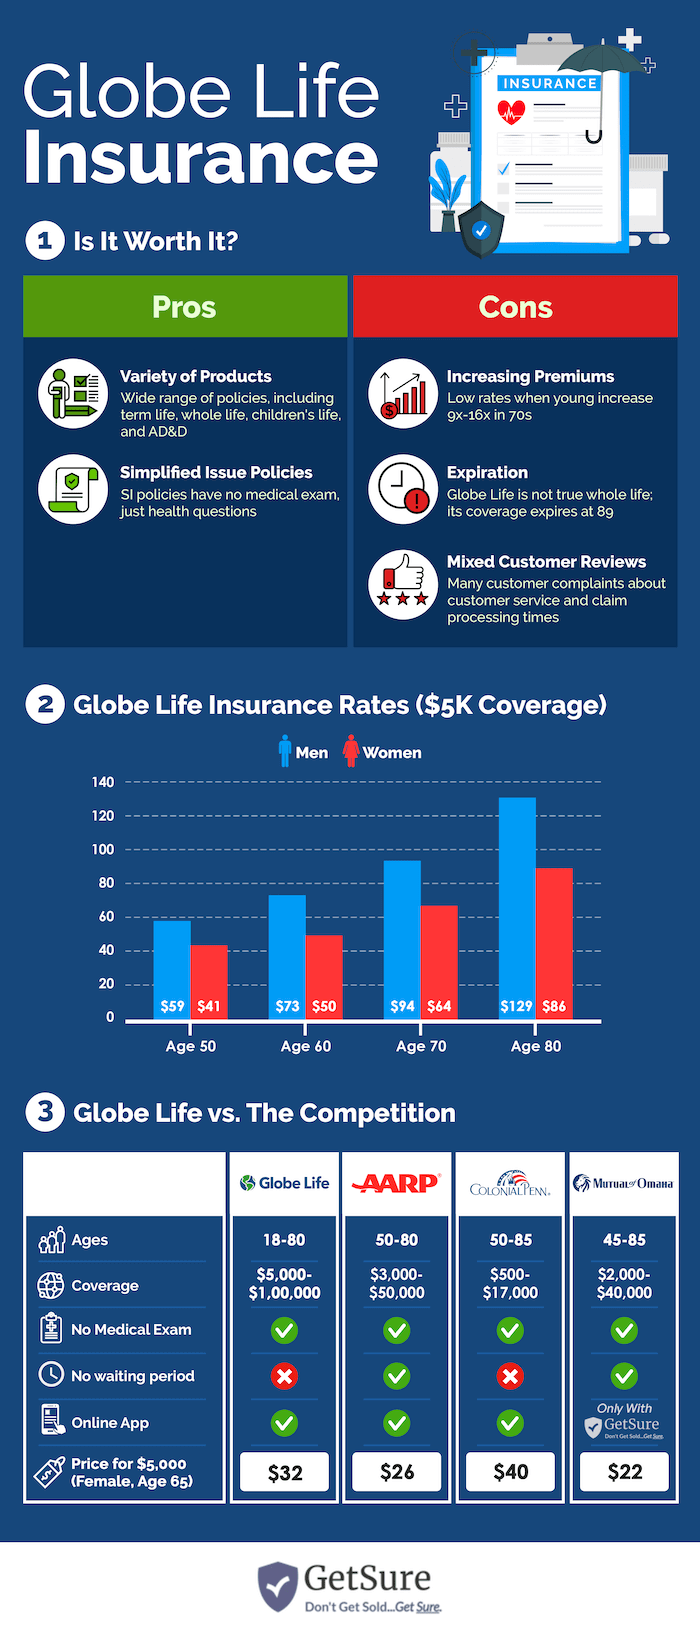 This infographic is split into three sections: (1) the first looks at the pros and cons of Globe Life insurance, (2) the second shows how much men and women would pay for $5K of coverage, and (3) the third shows a comparison of Globe Life insurance to other well-known life insurance options for seniors